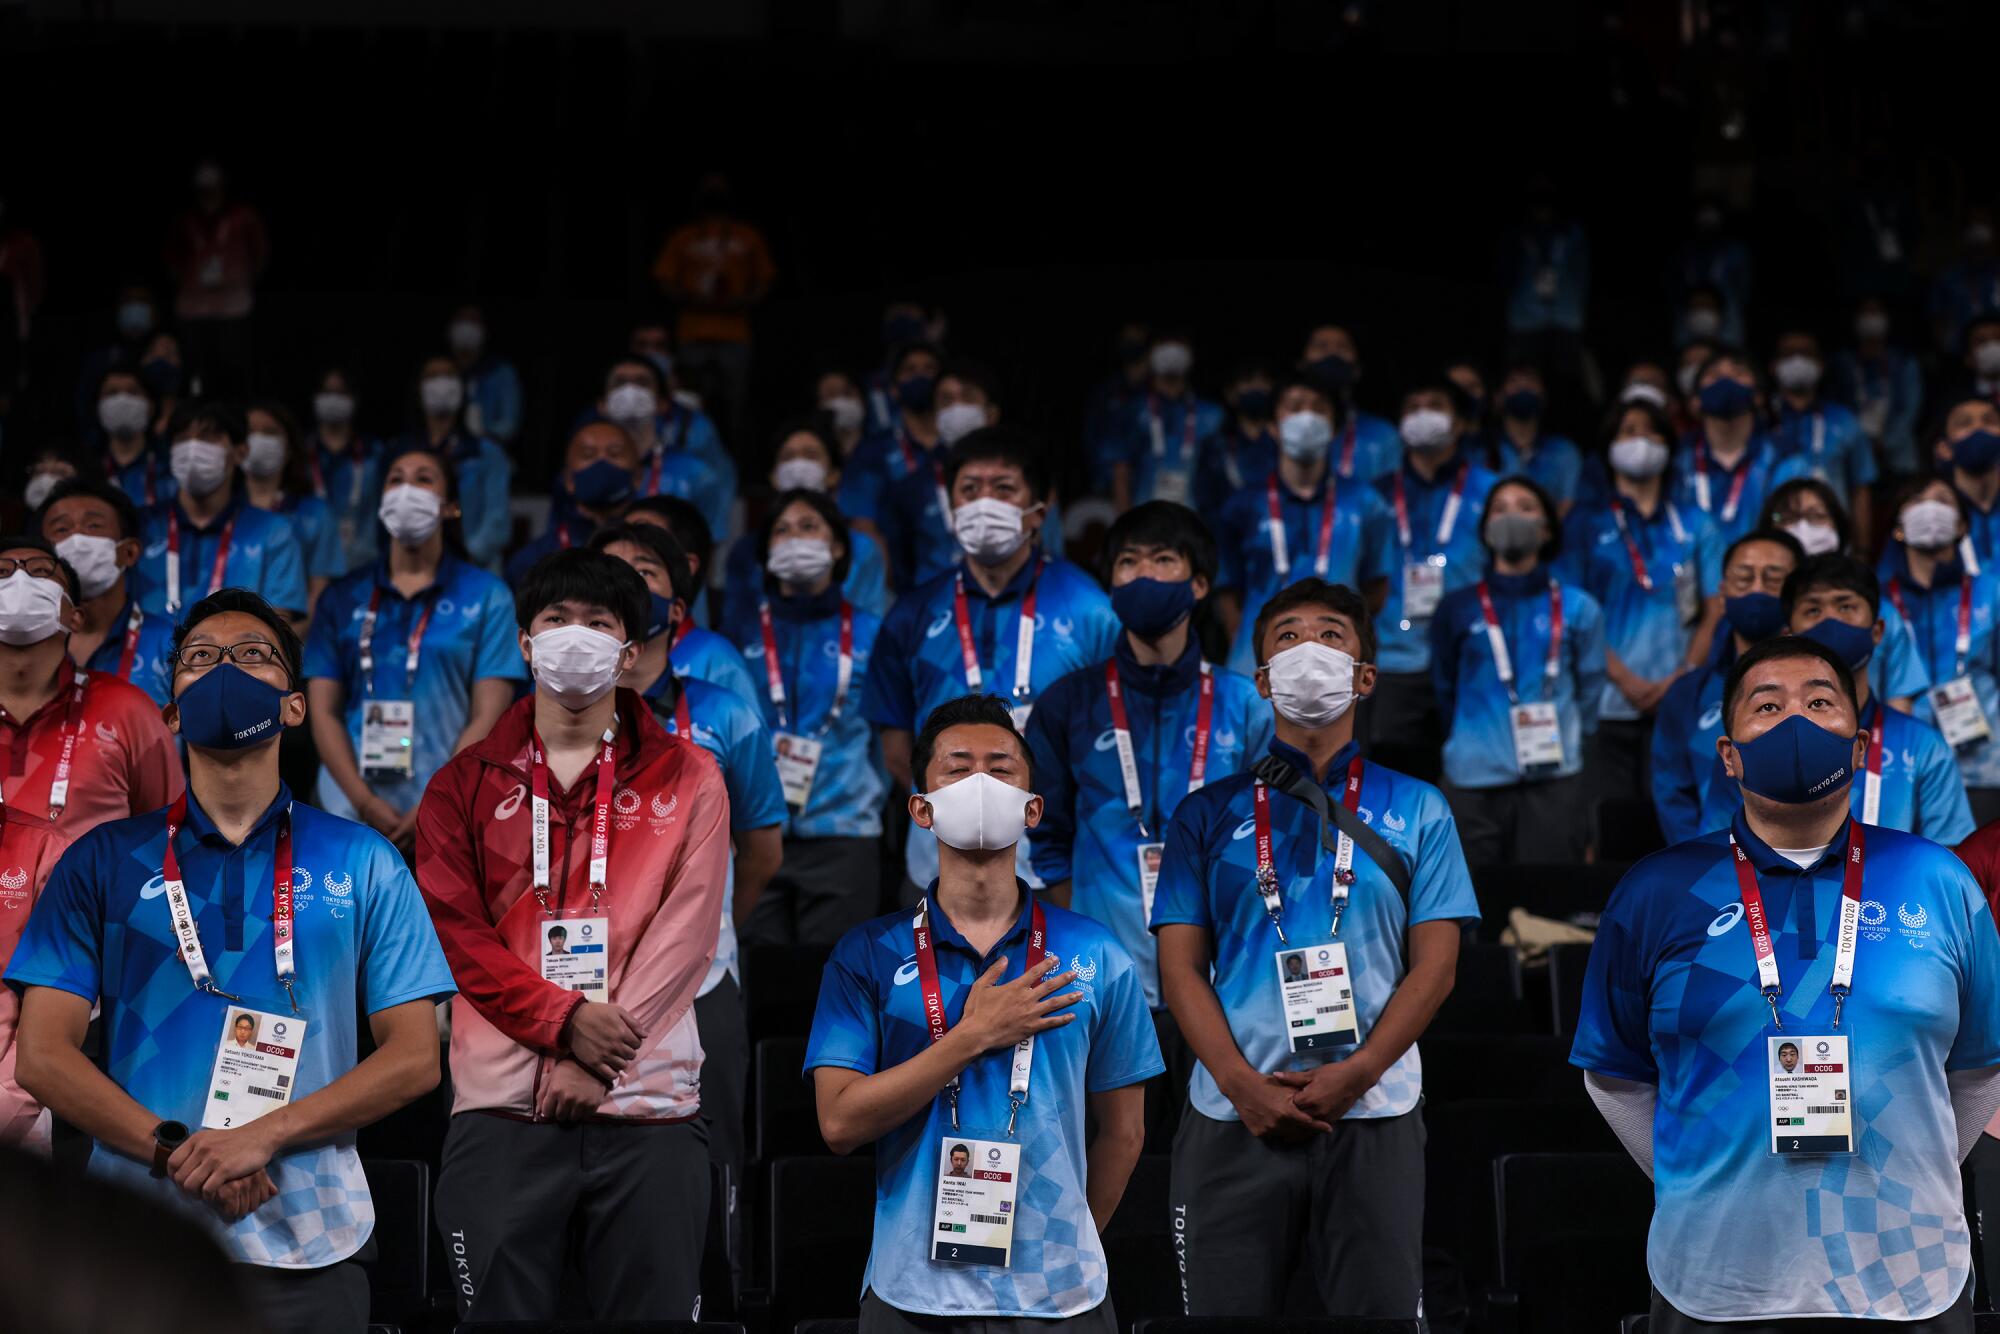 People wearing matching shirts and masks, with credentials hanging around their necks, stand in rows.